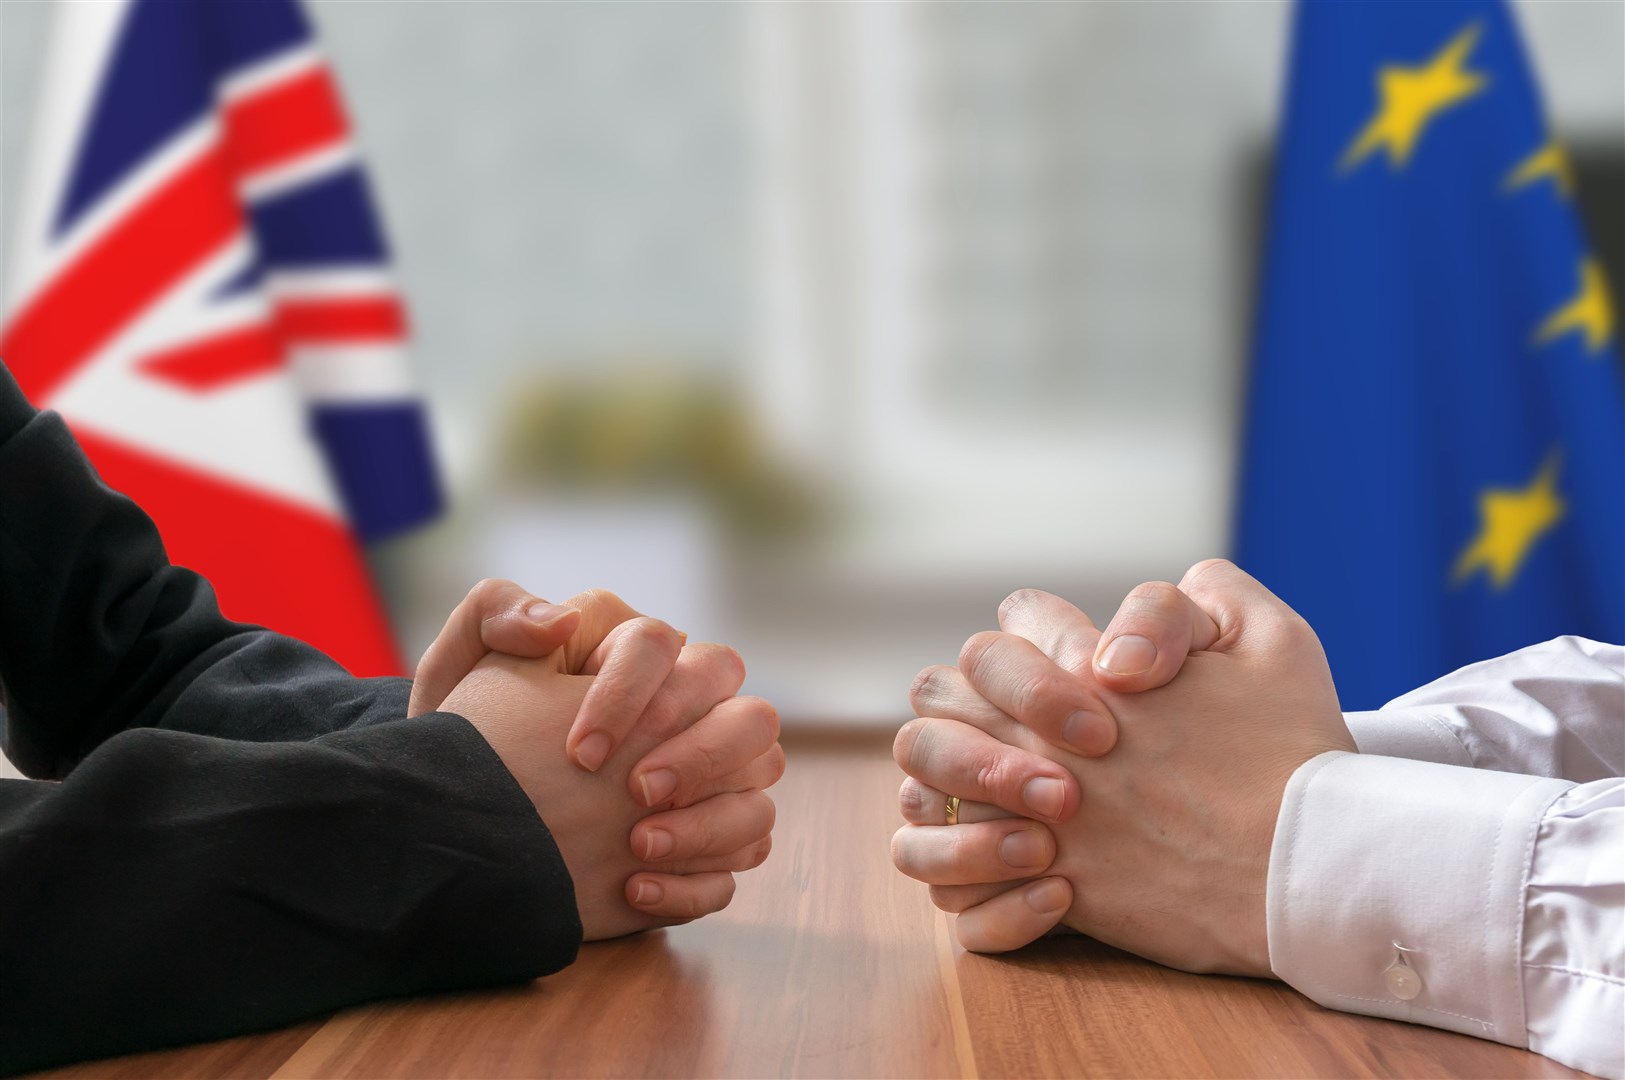 Brexit negotiations between Great Britain and European Union continue.